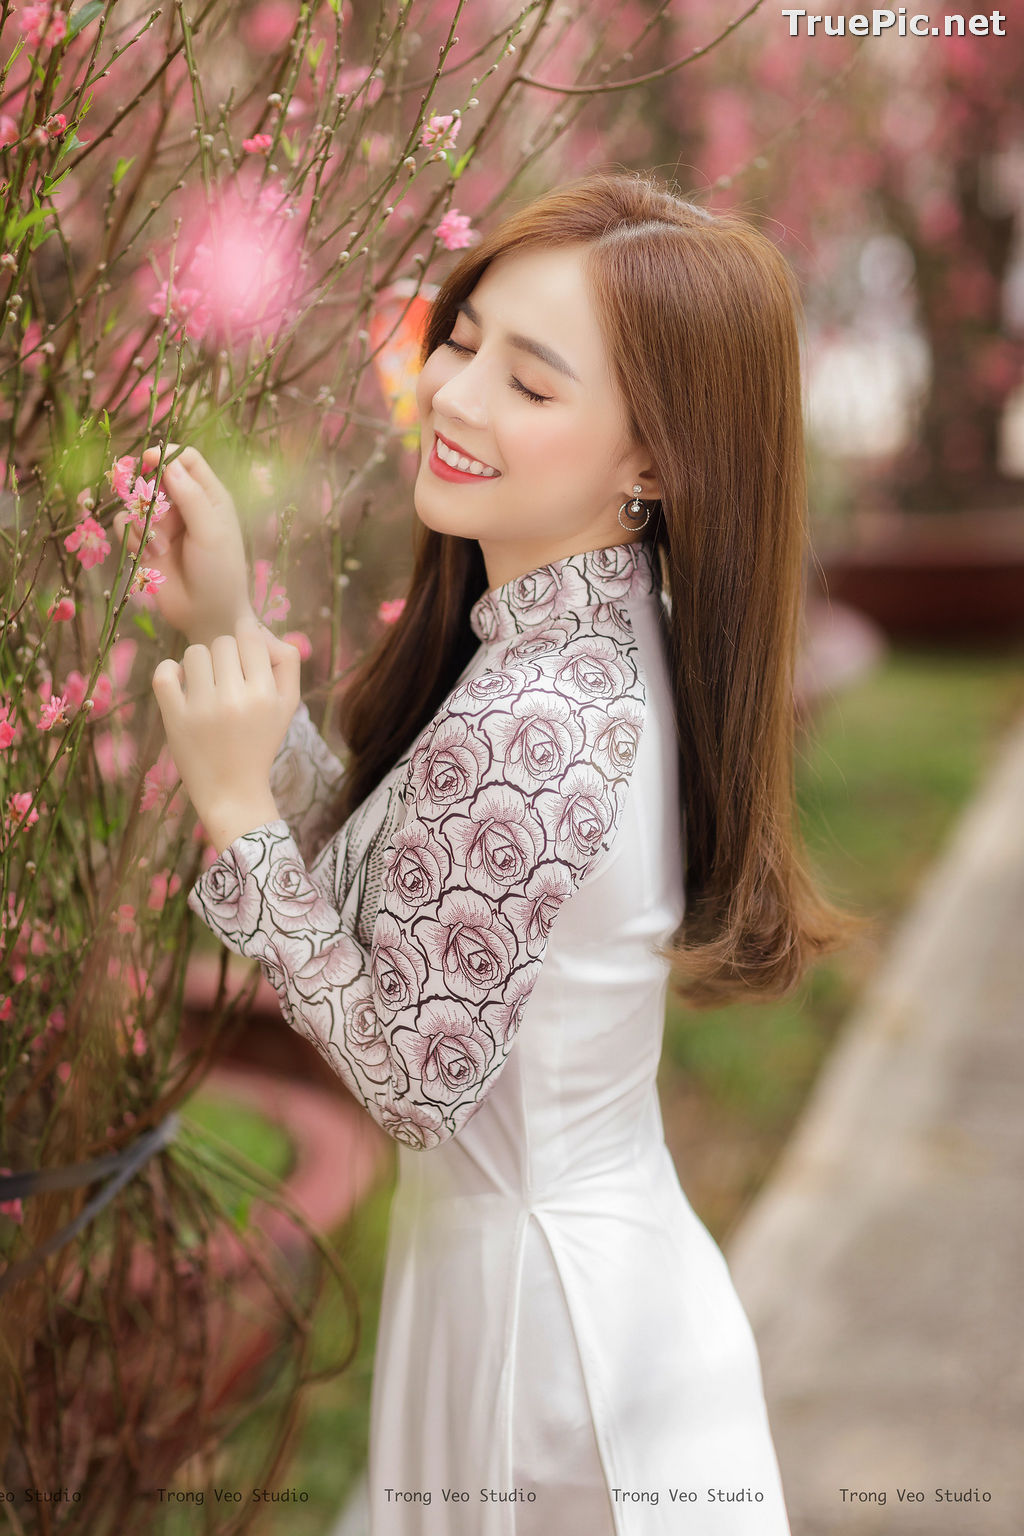 Image The Beauty of Vietnamese Girls with Traditional Dress (Ao Dai) #4 - TruePic.net - Picture-56